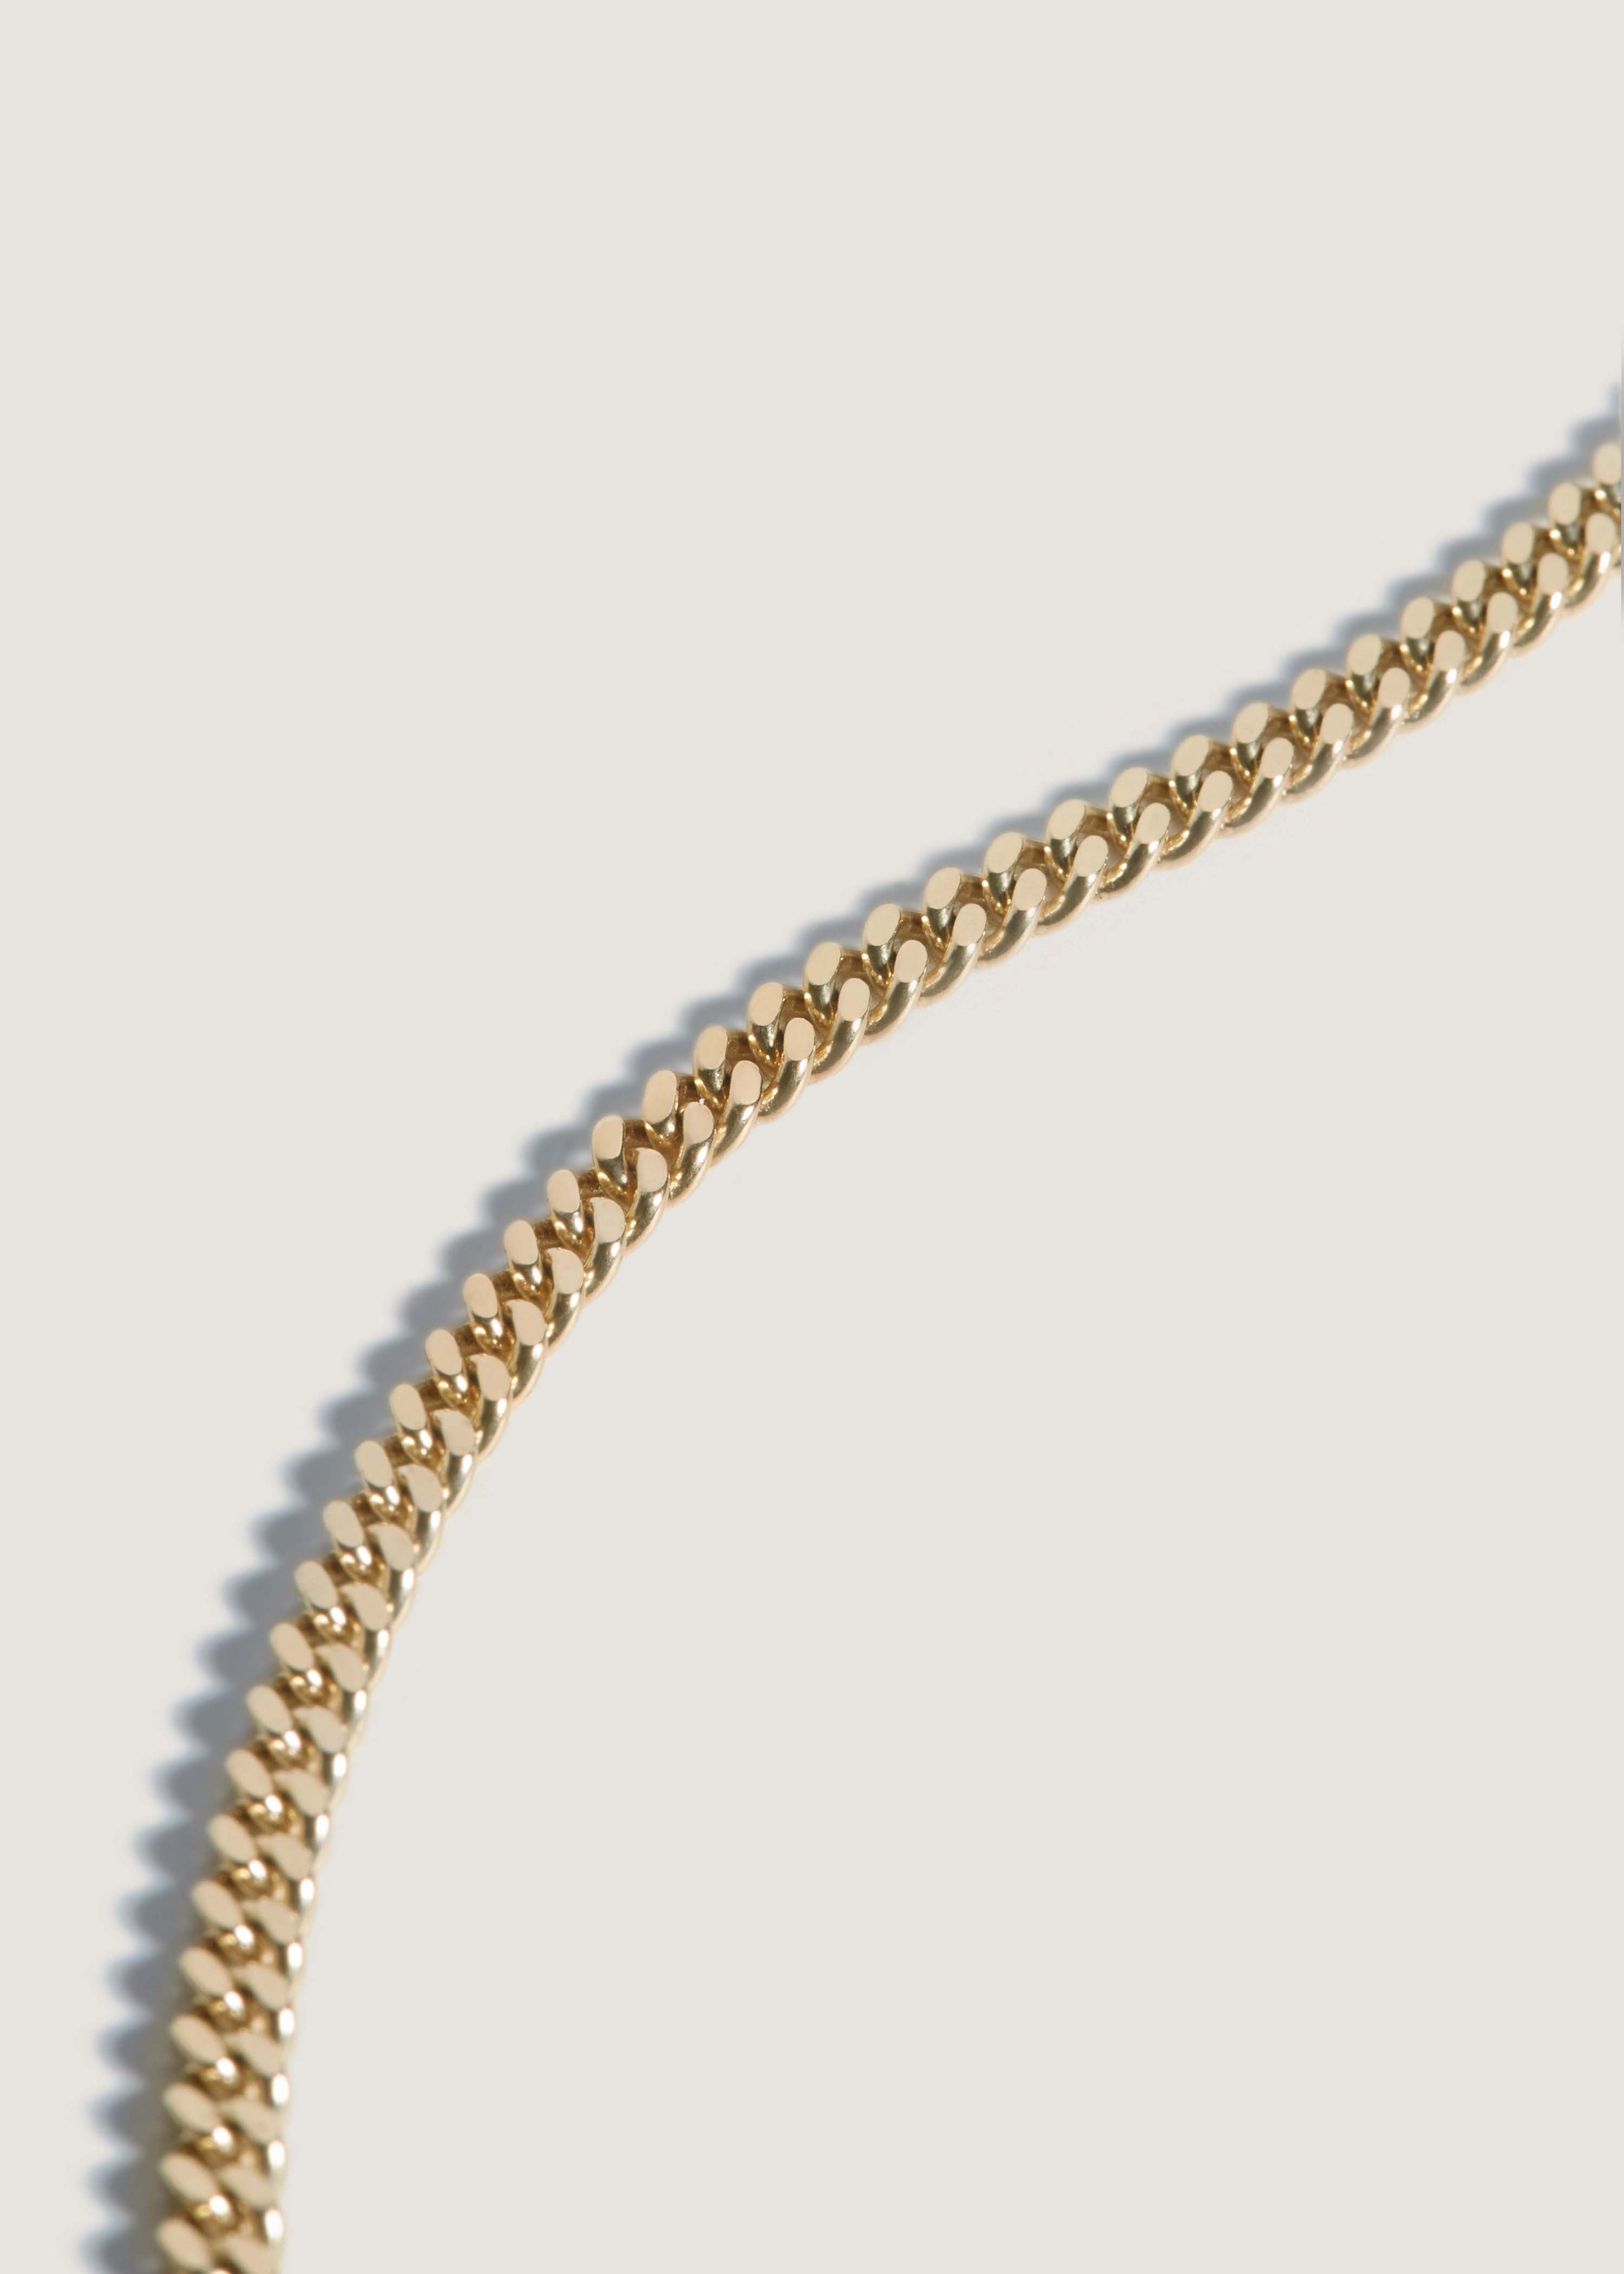 Giant Gold Curb Chain Necklace - Tilly Sveaas Jewellery